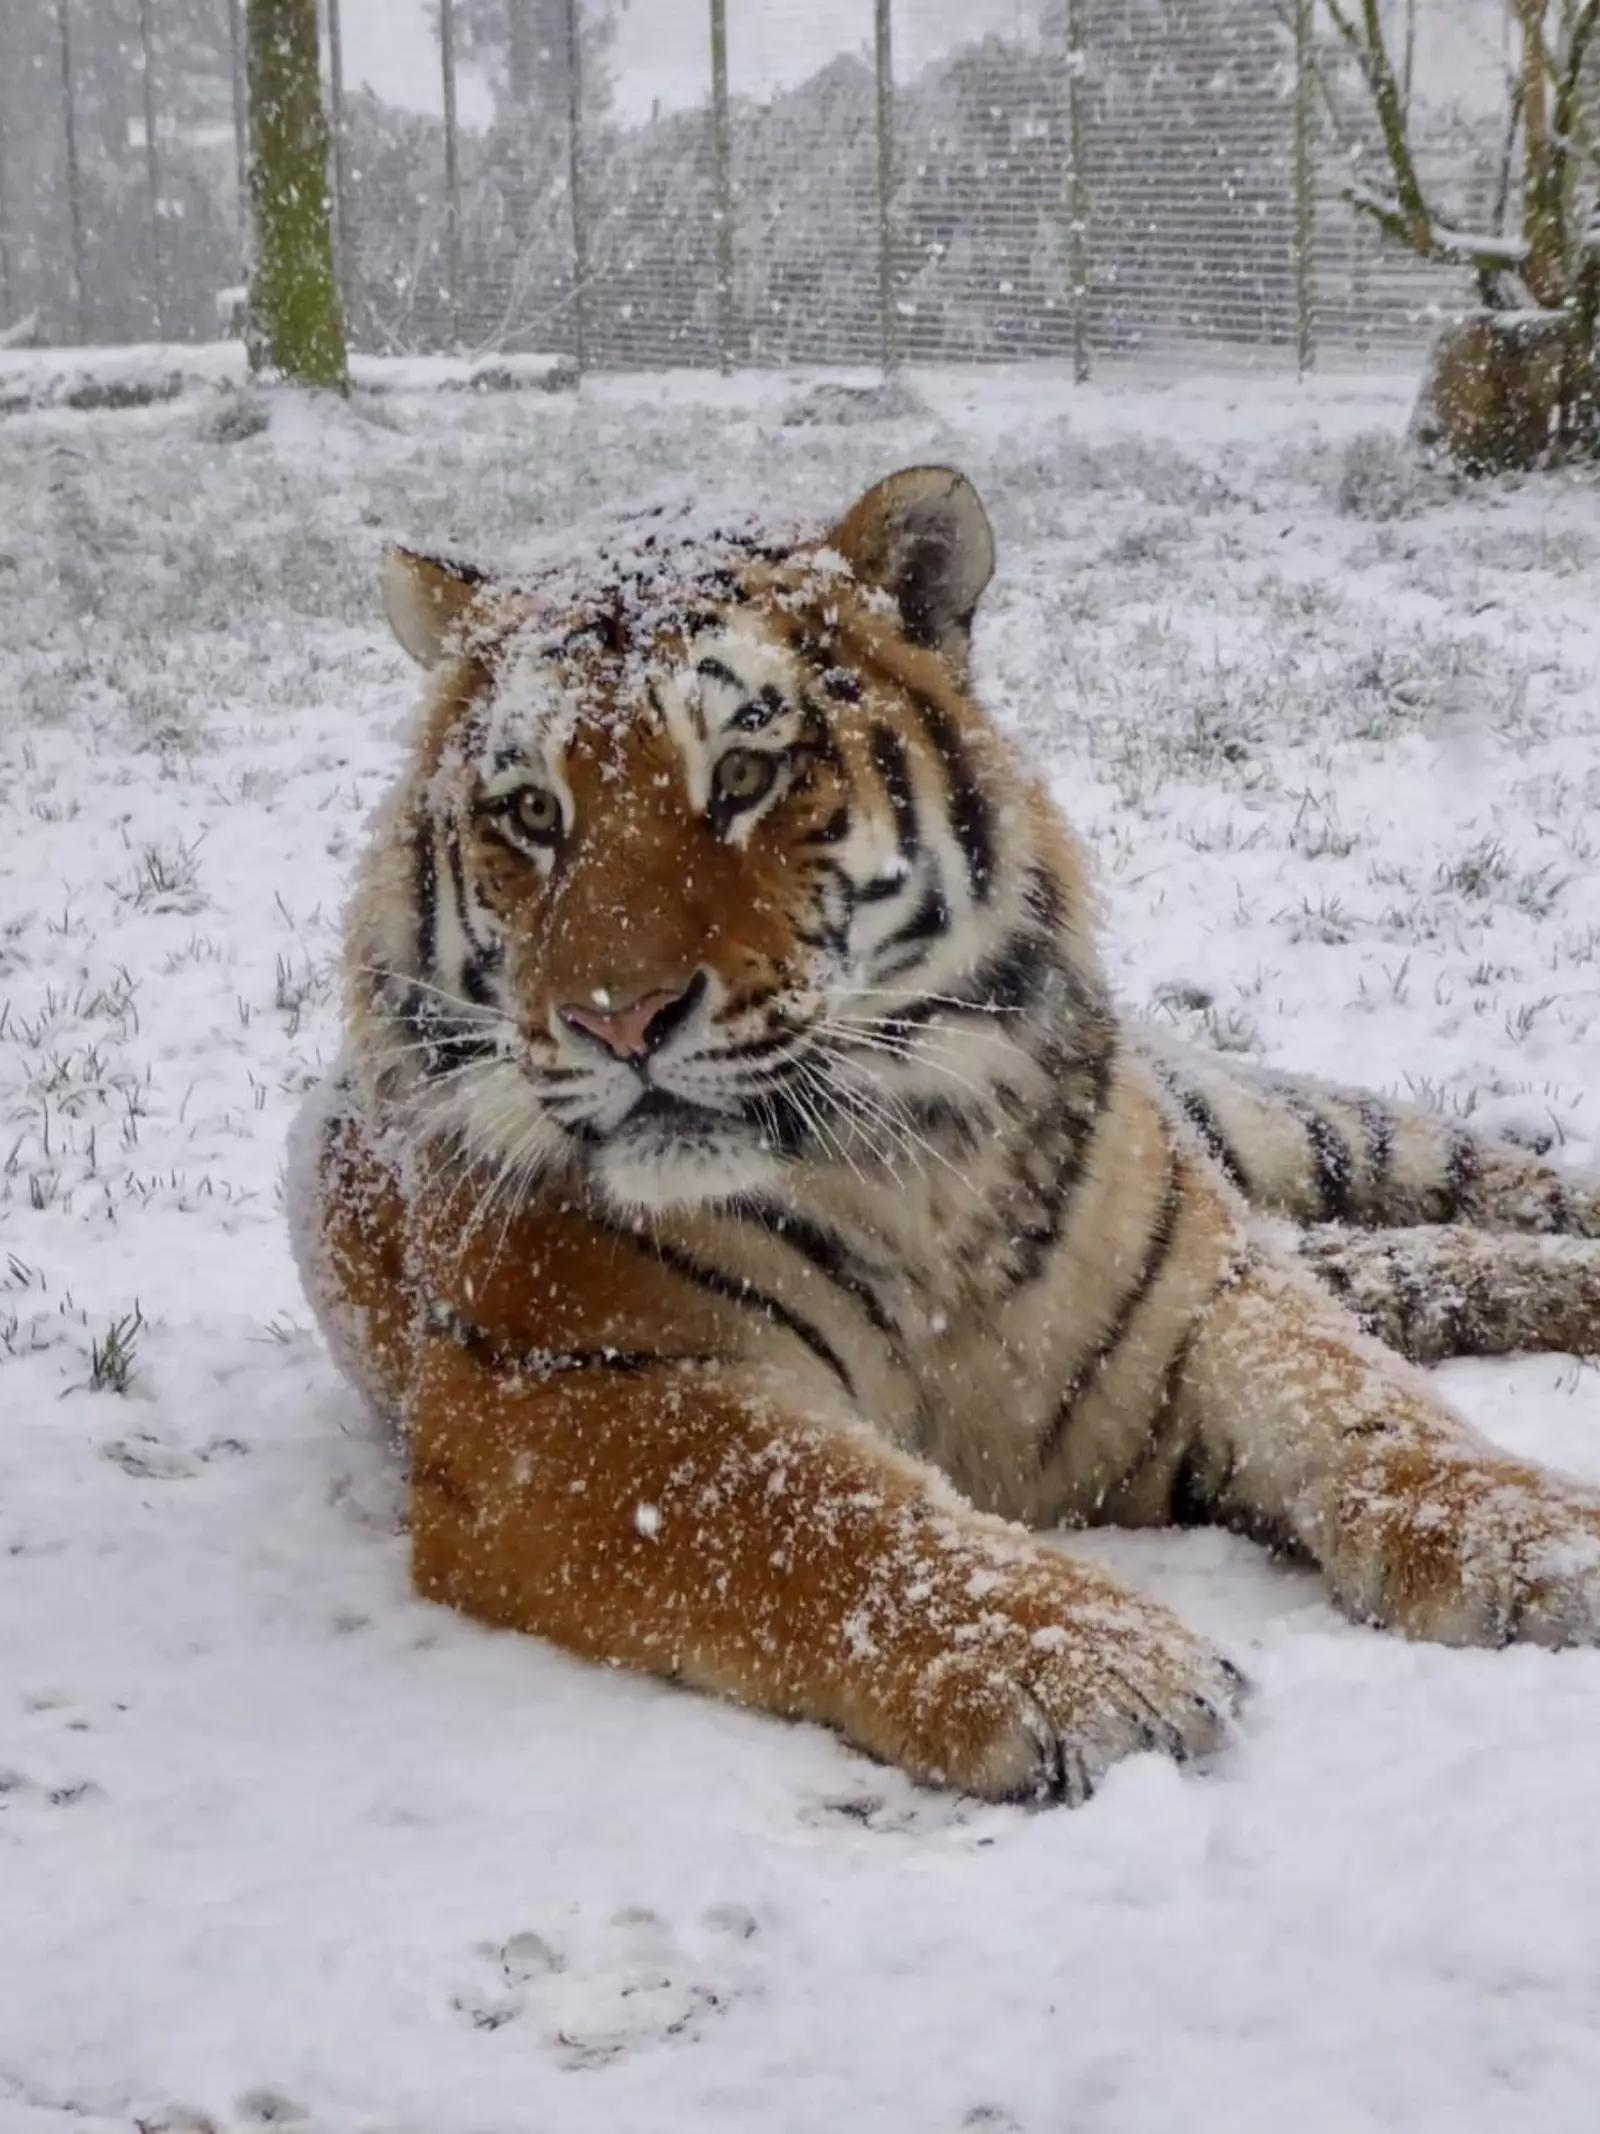 An Amur tiger in the snow at Whipsnade Zoo